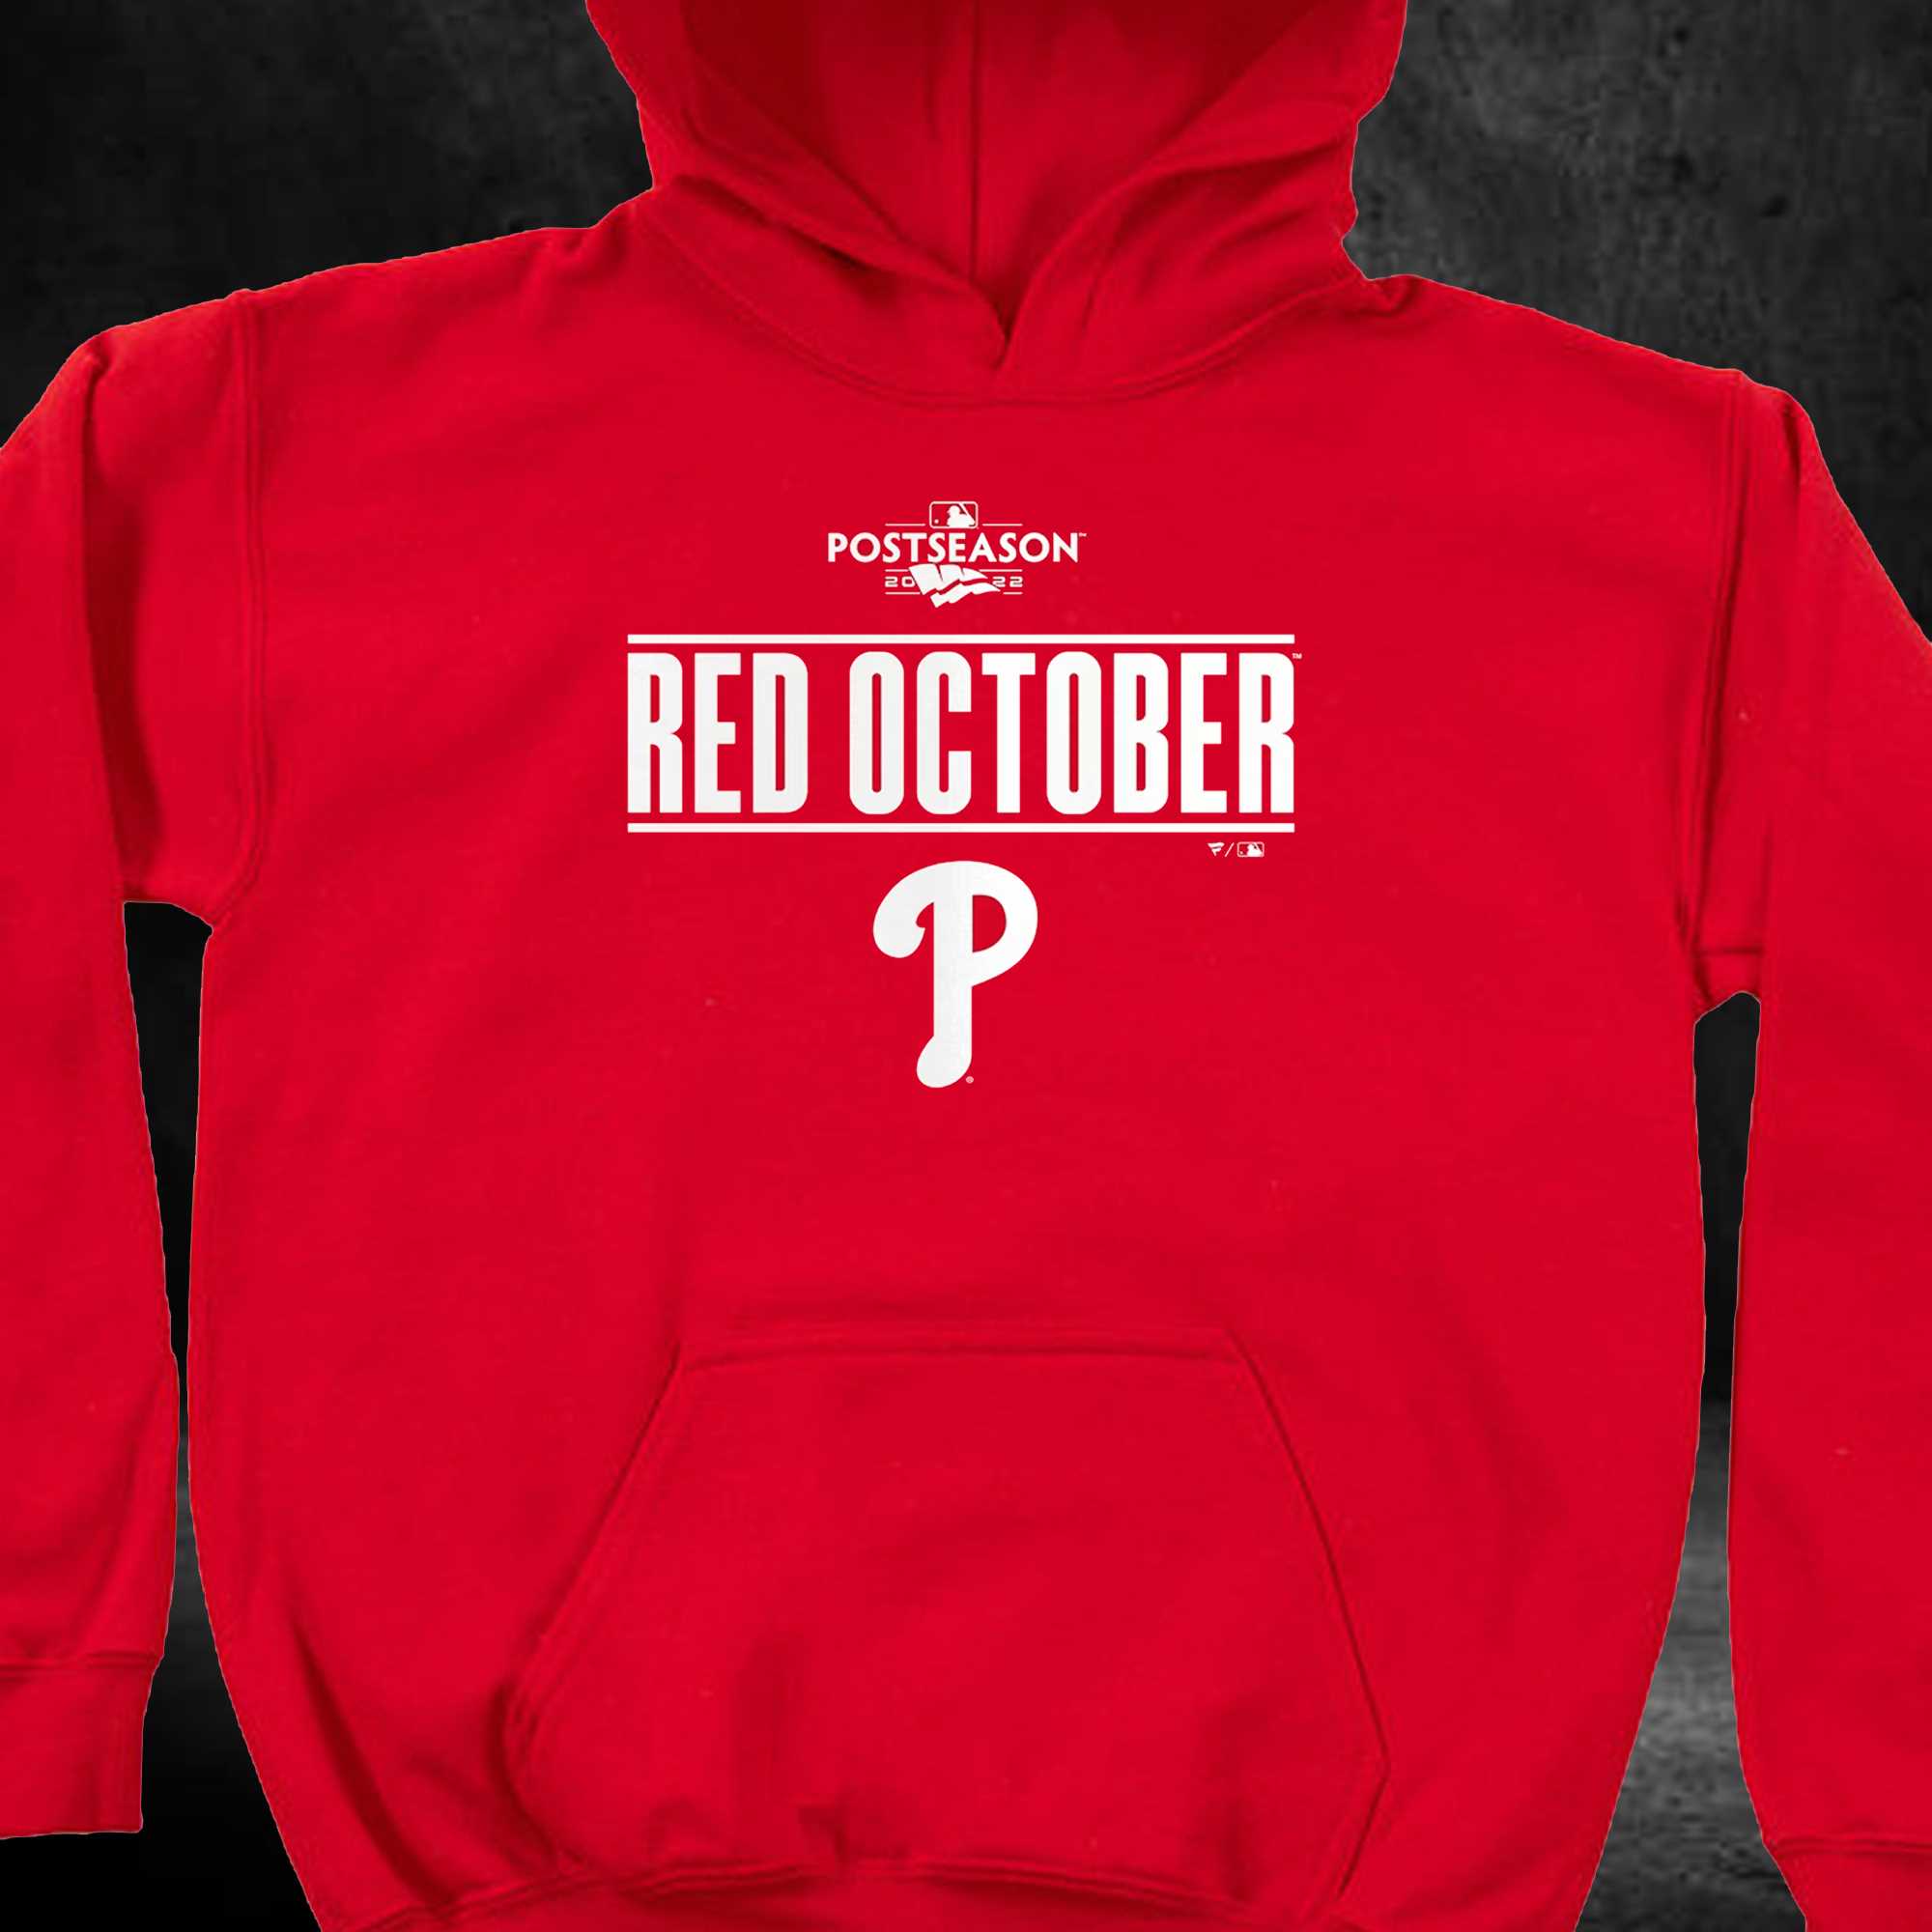 Official Philadelphia Phillies Playoffs Gear, Phillies Postseason Tees,  Hats, Hoodies, Collectibles